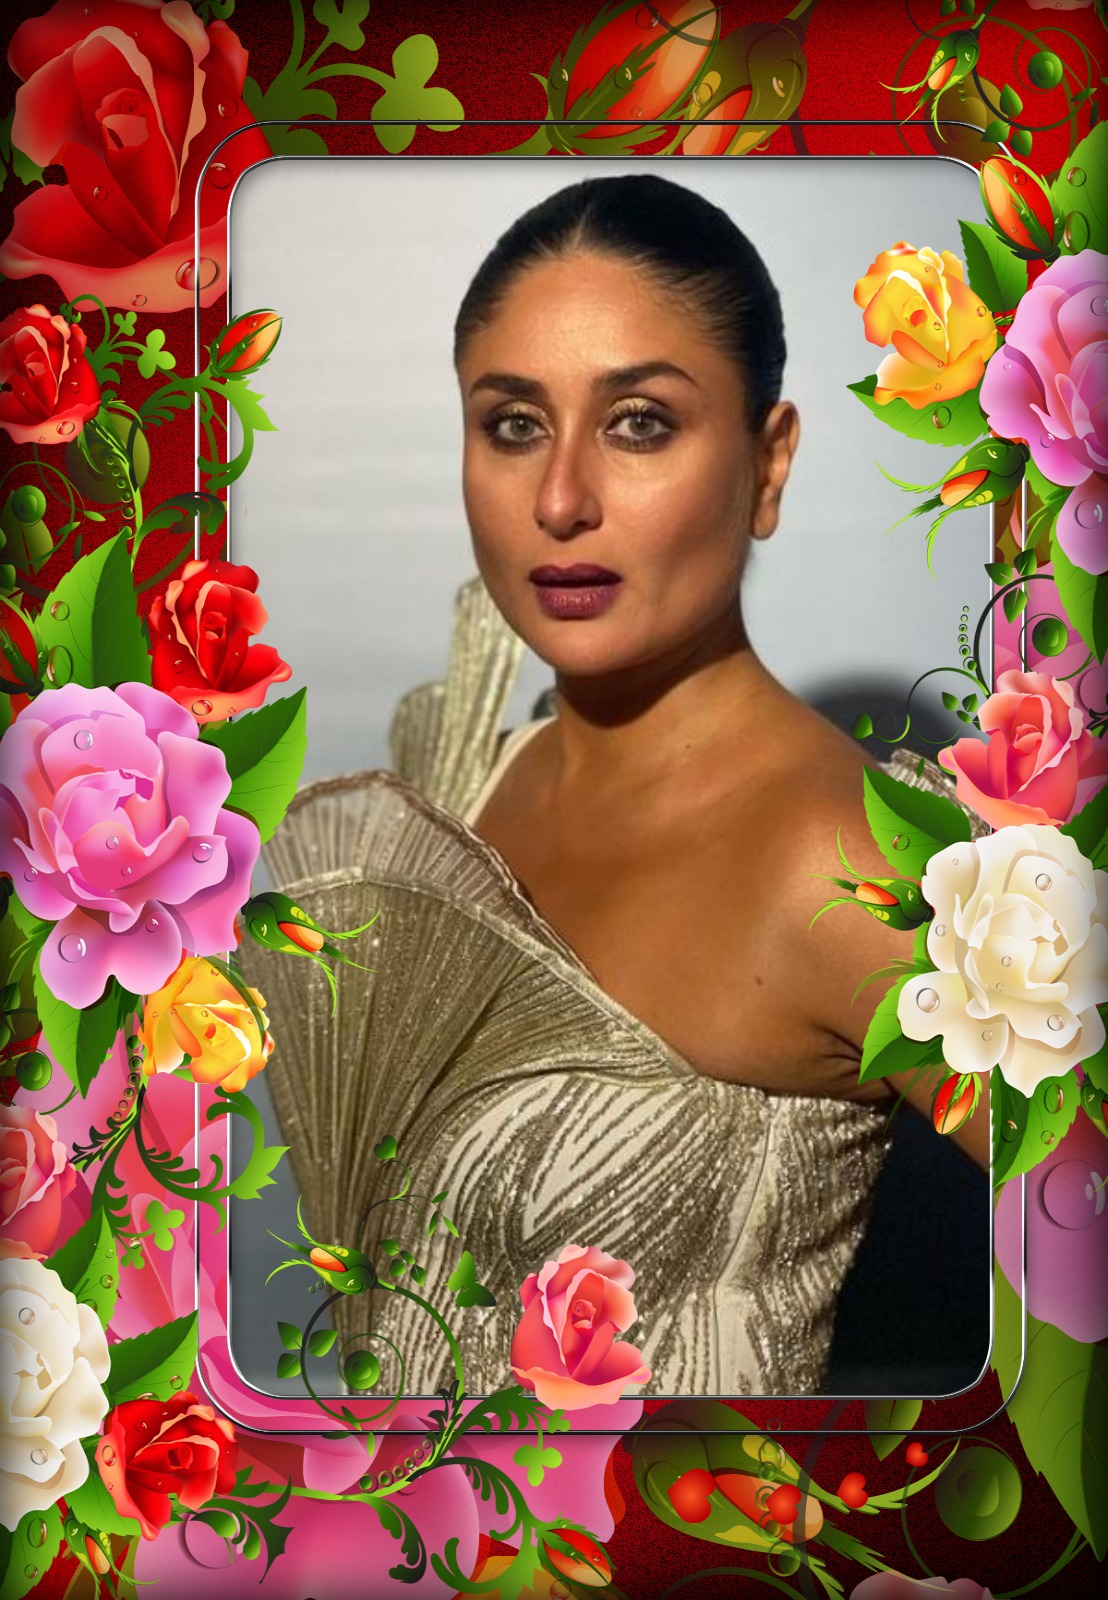 Read more about the article ” Still Feels To Be Full Of Beans- Kareena Kapoor”